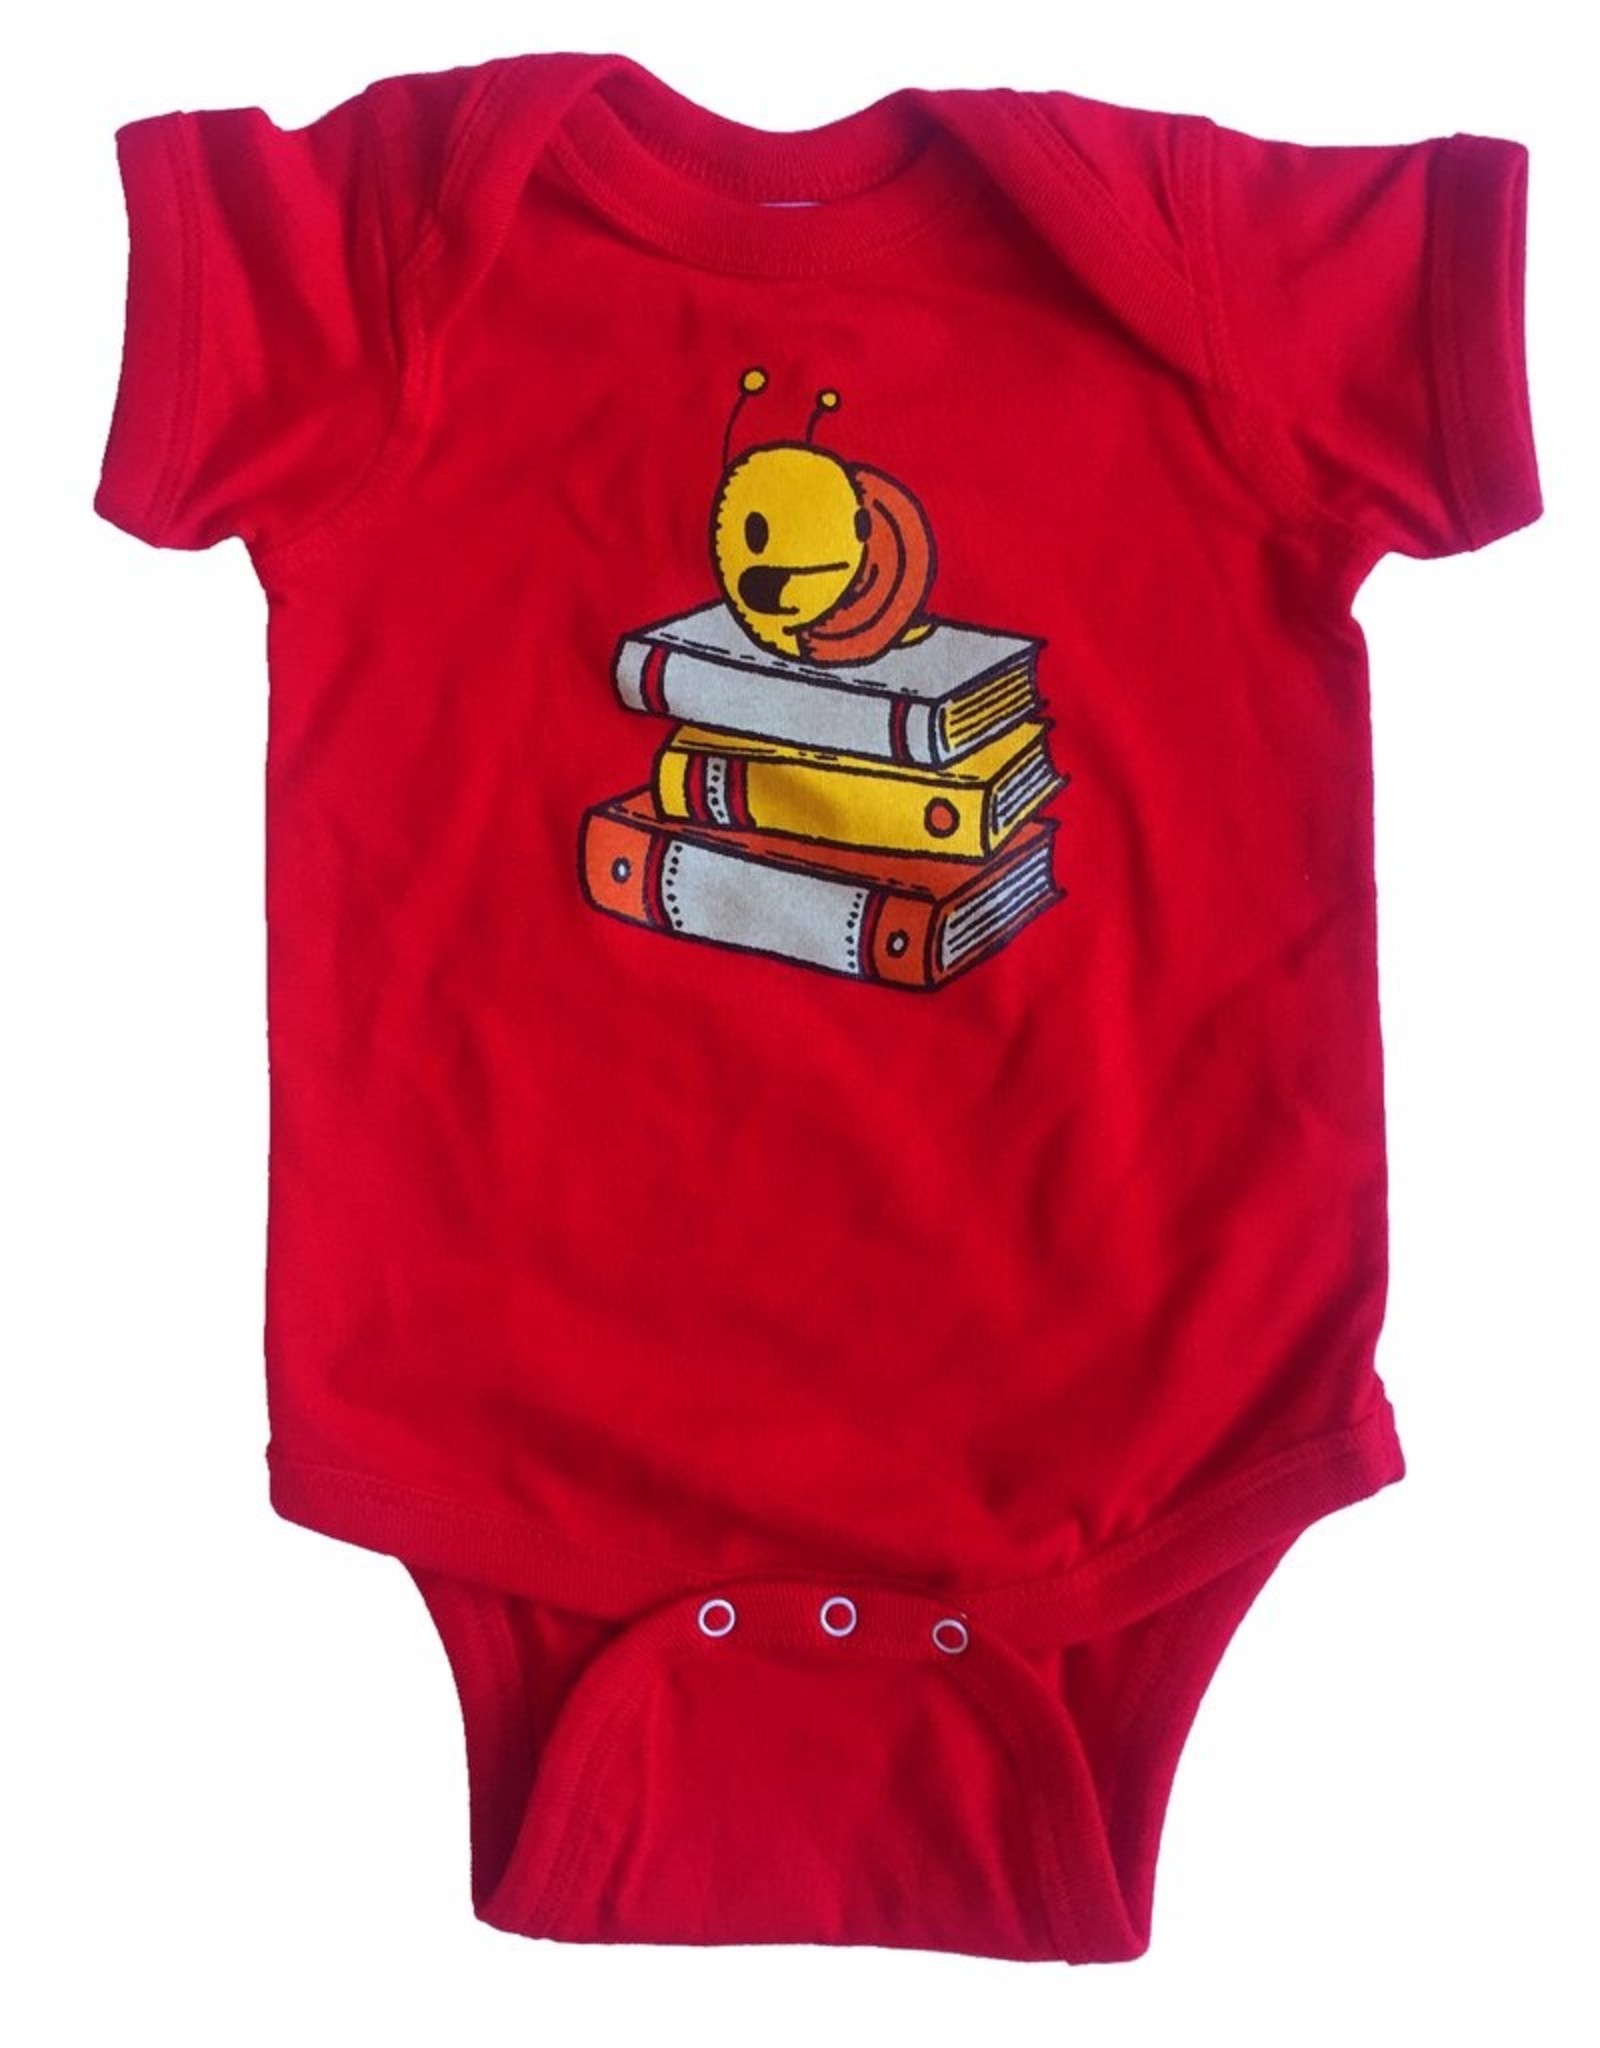 everyday balloons print shop Onesies by everyday balloons print shop